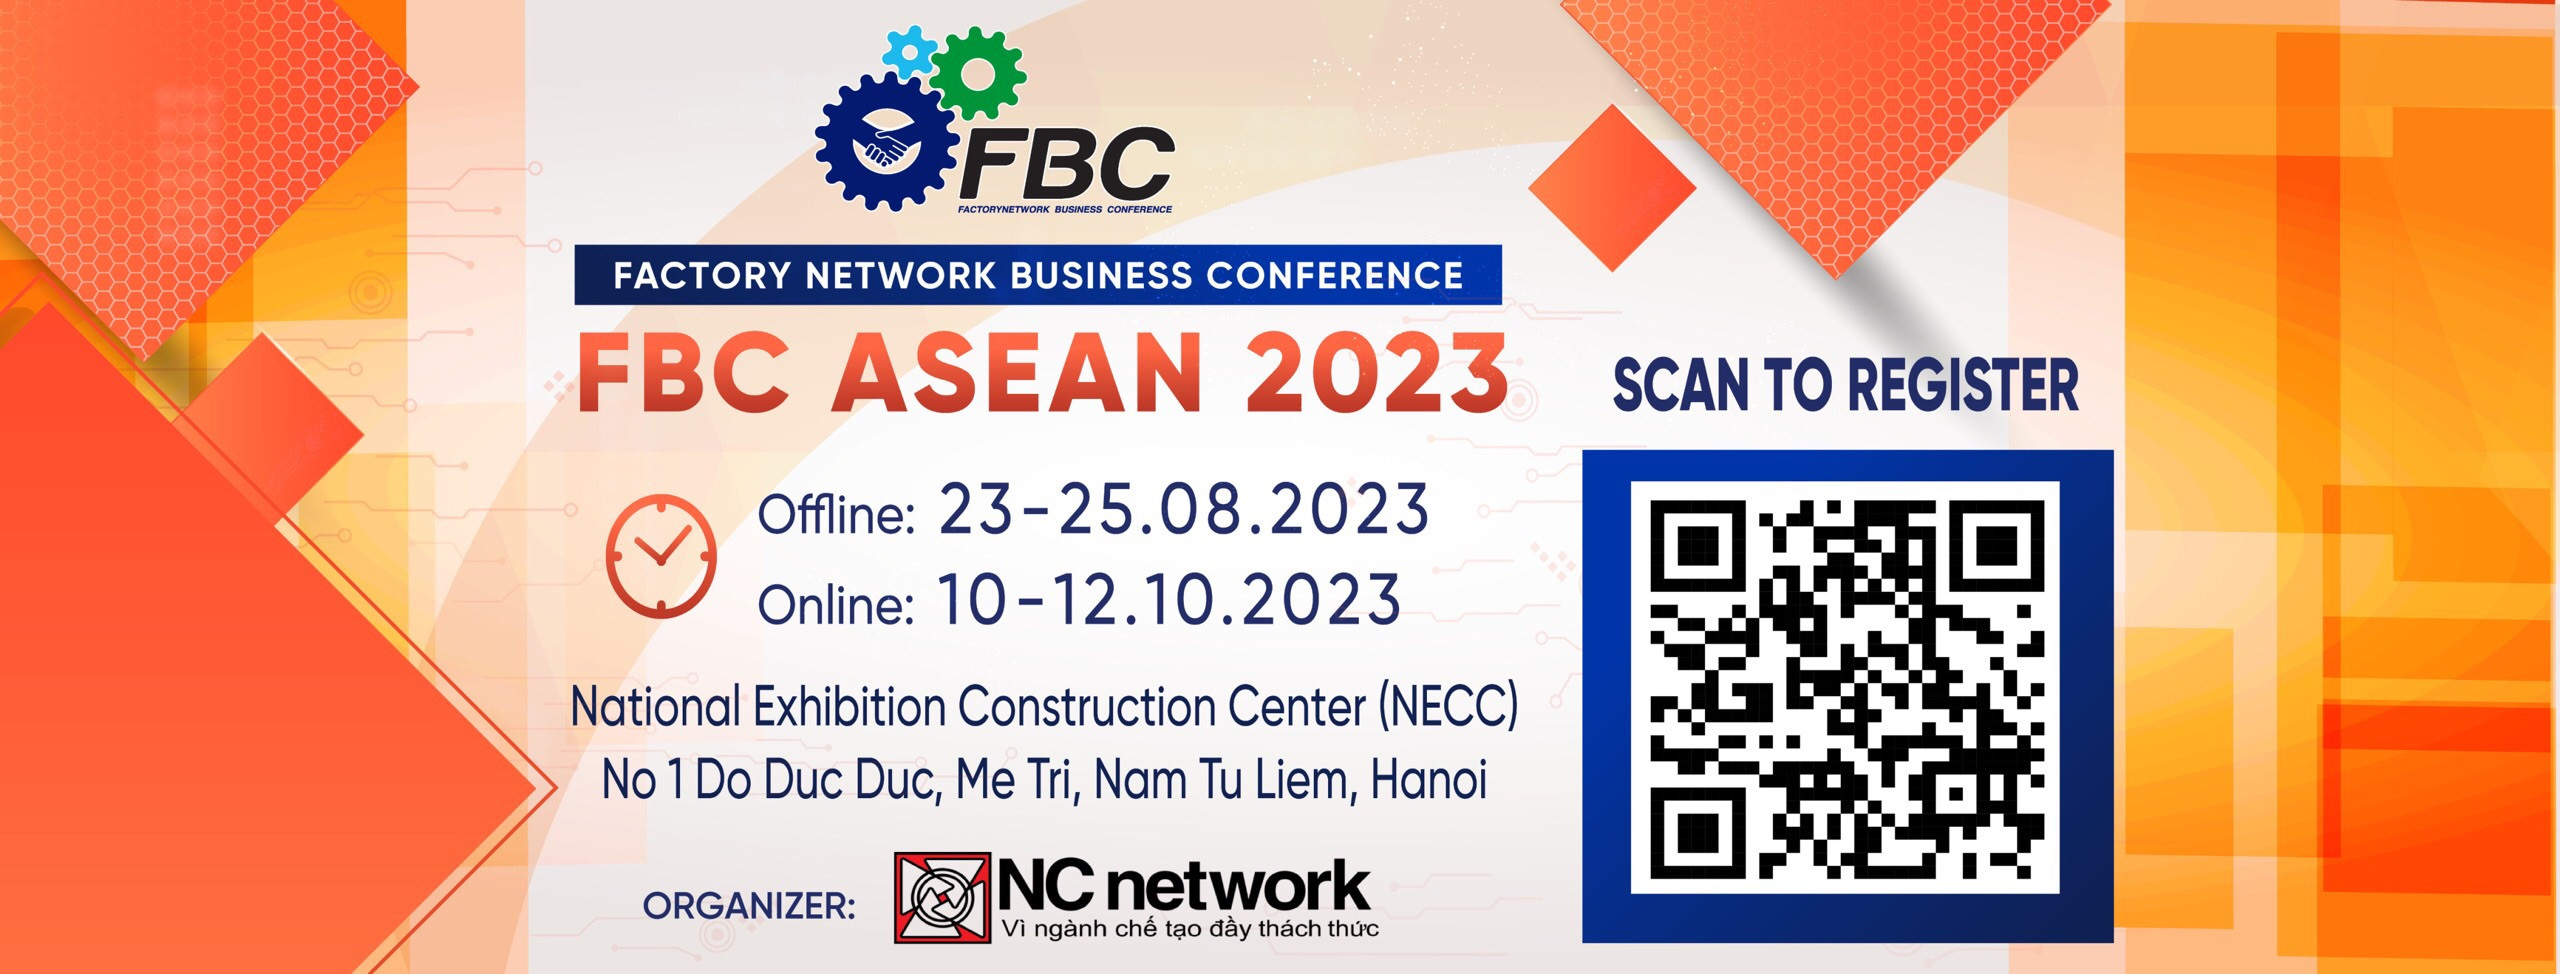 Factory Network Business Conference ASEAN 2023 - Exhibitors List (9)